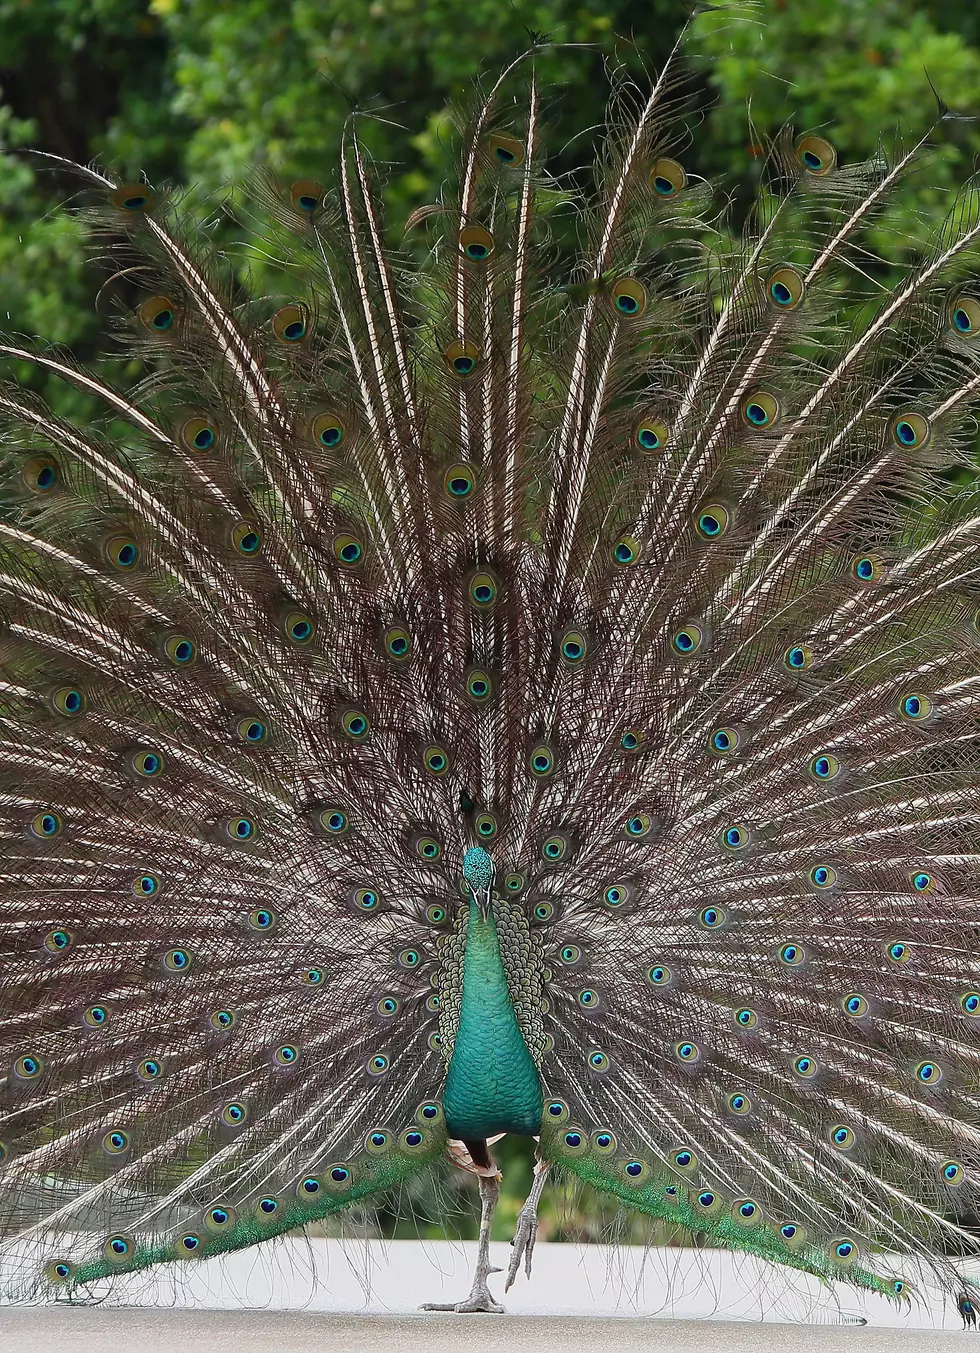 Emotional Support Peacock?